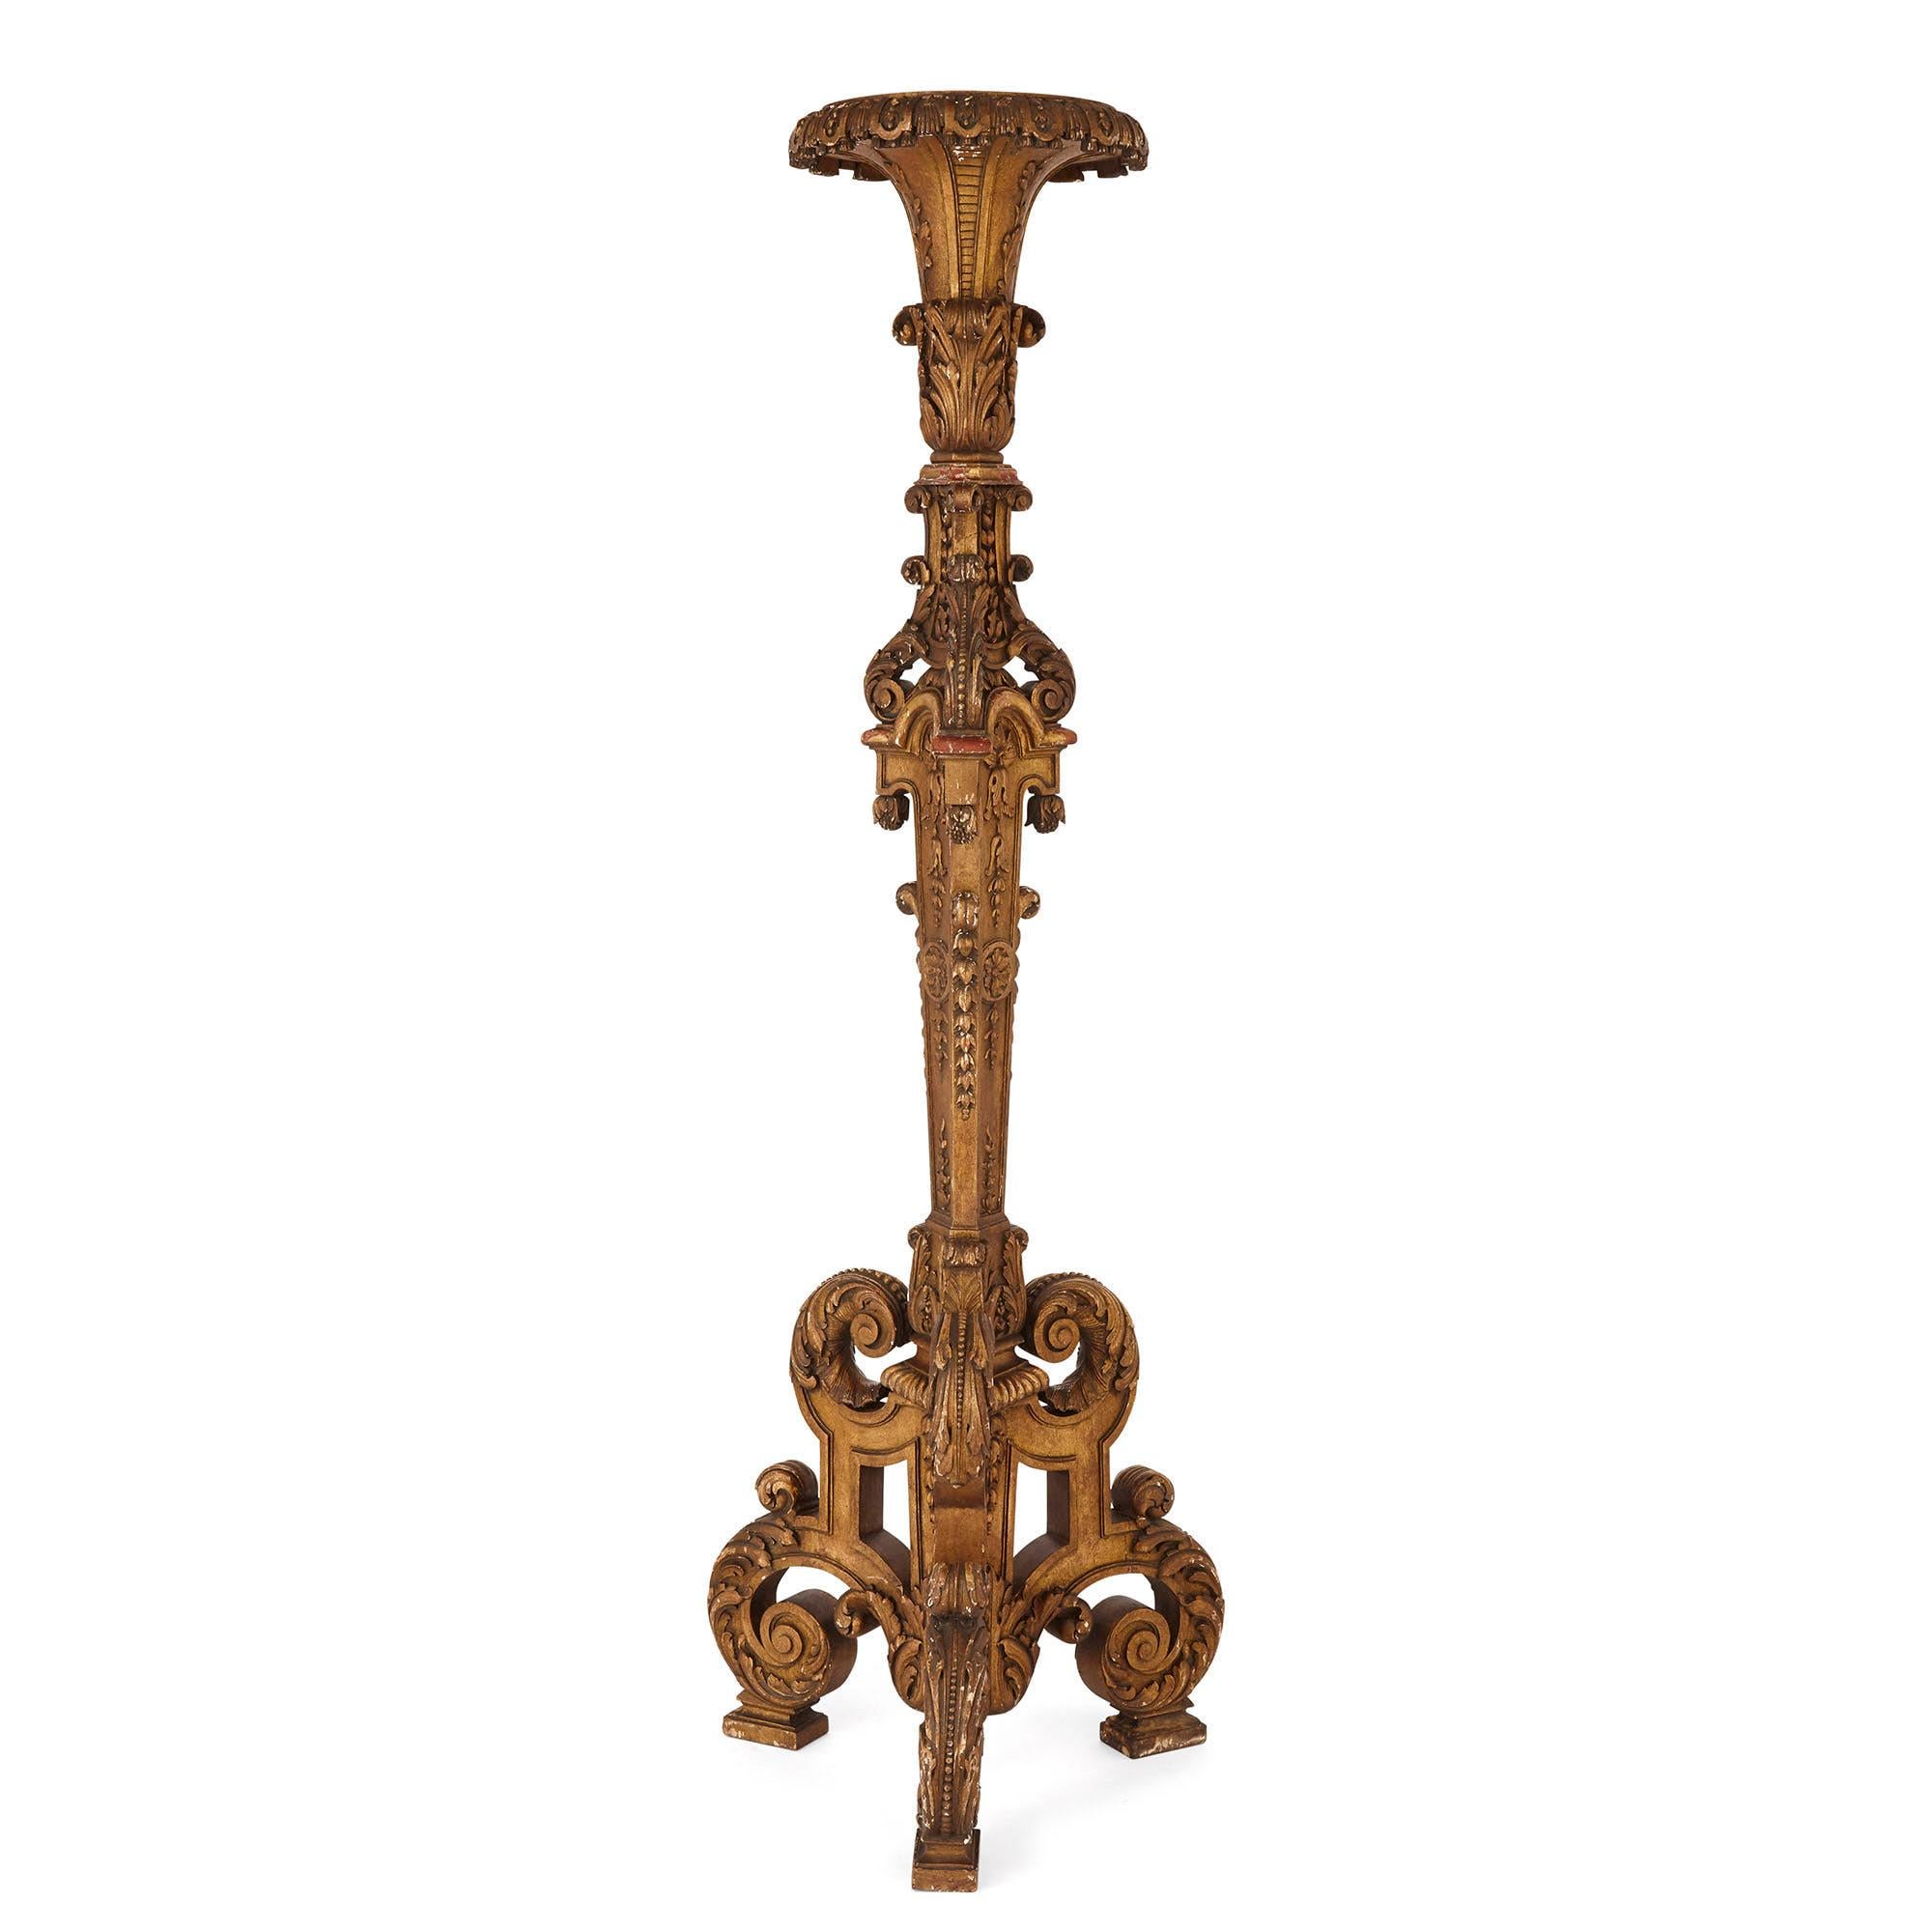 Large neoclassical style giltwood torchère
French, late 19th century
Measures: Height 170cm, diameter 52cm

This fine and large neoclassical style torchère is crafted from delicately carved and giltwood. The torchère is raised on a tripod base